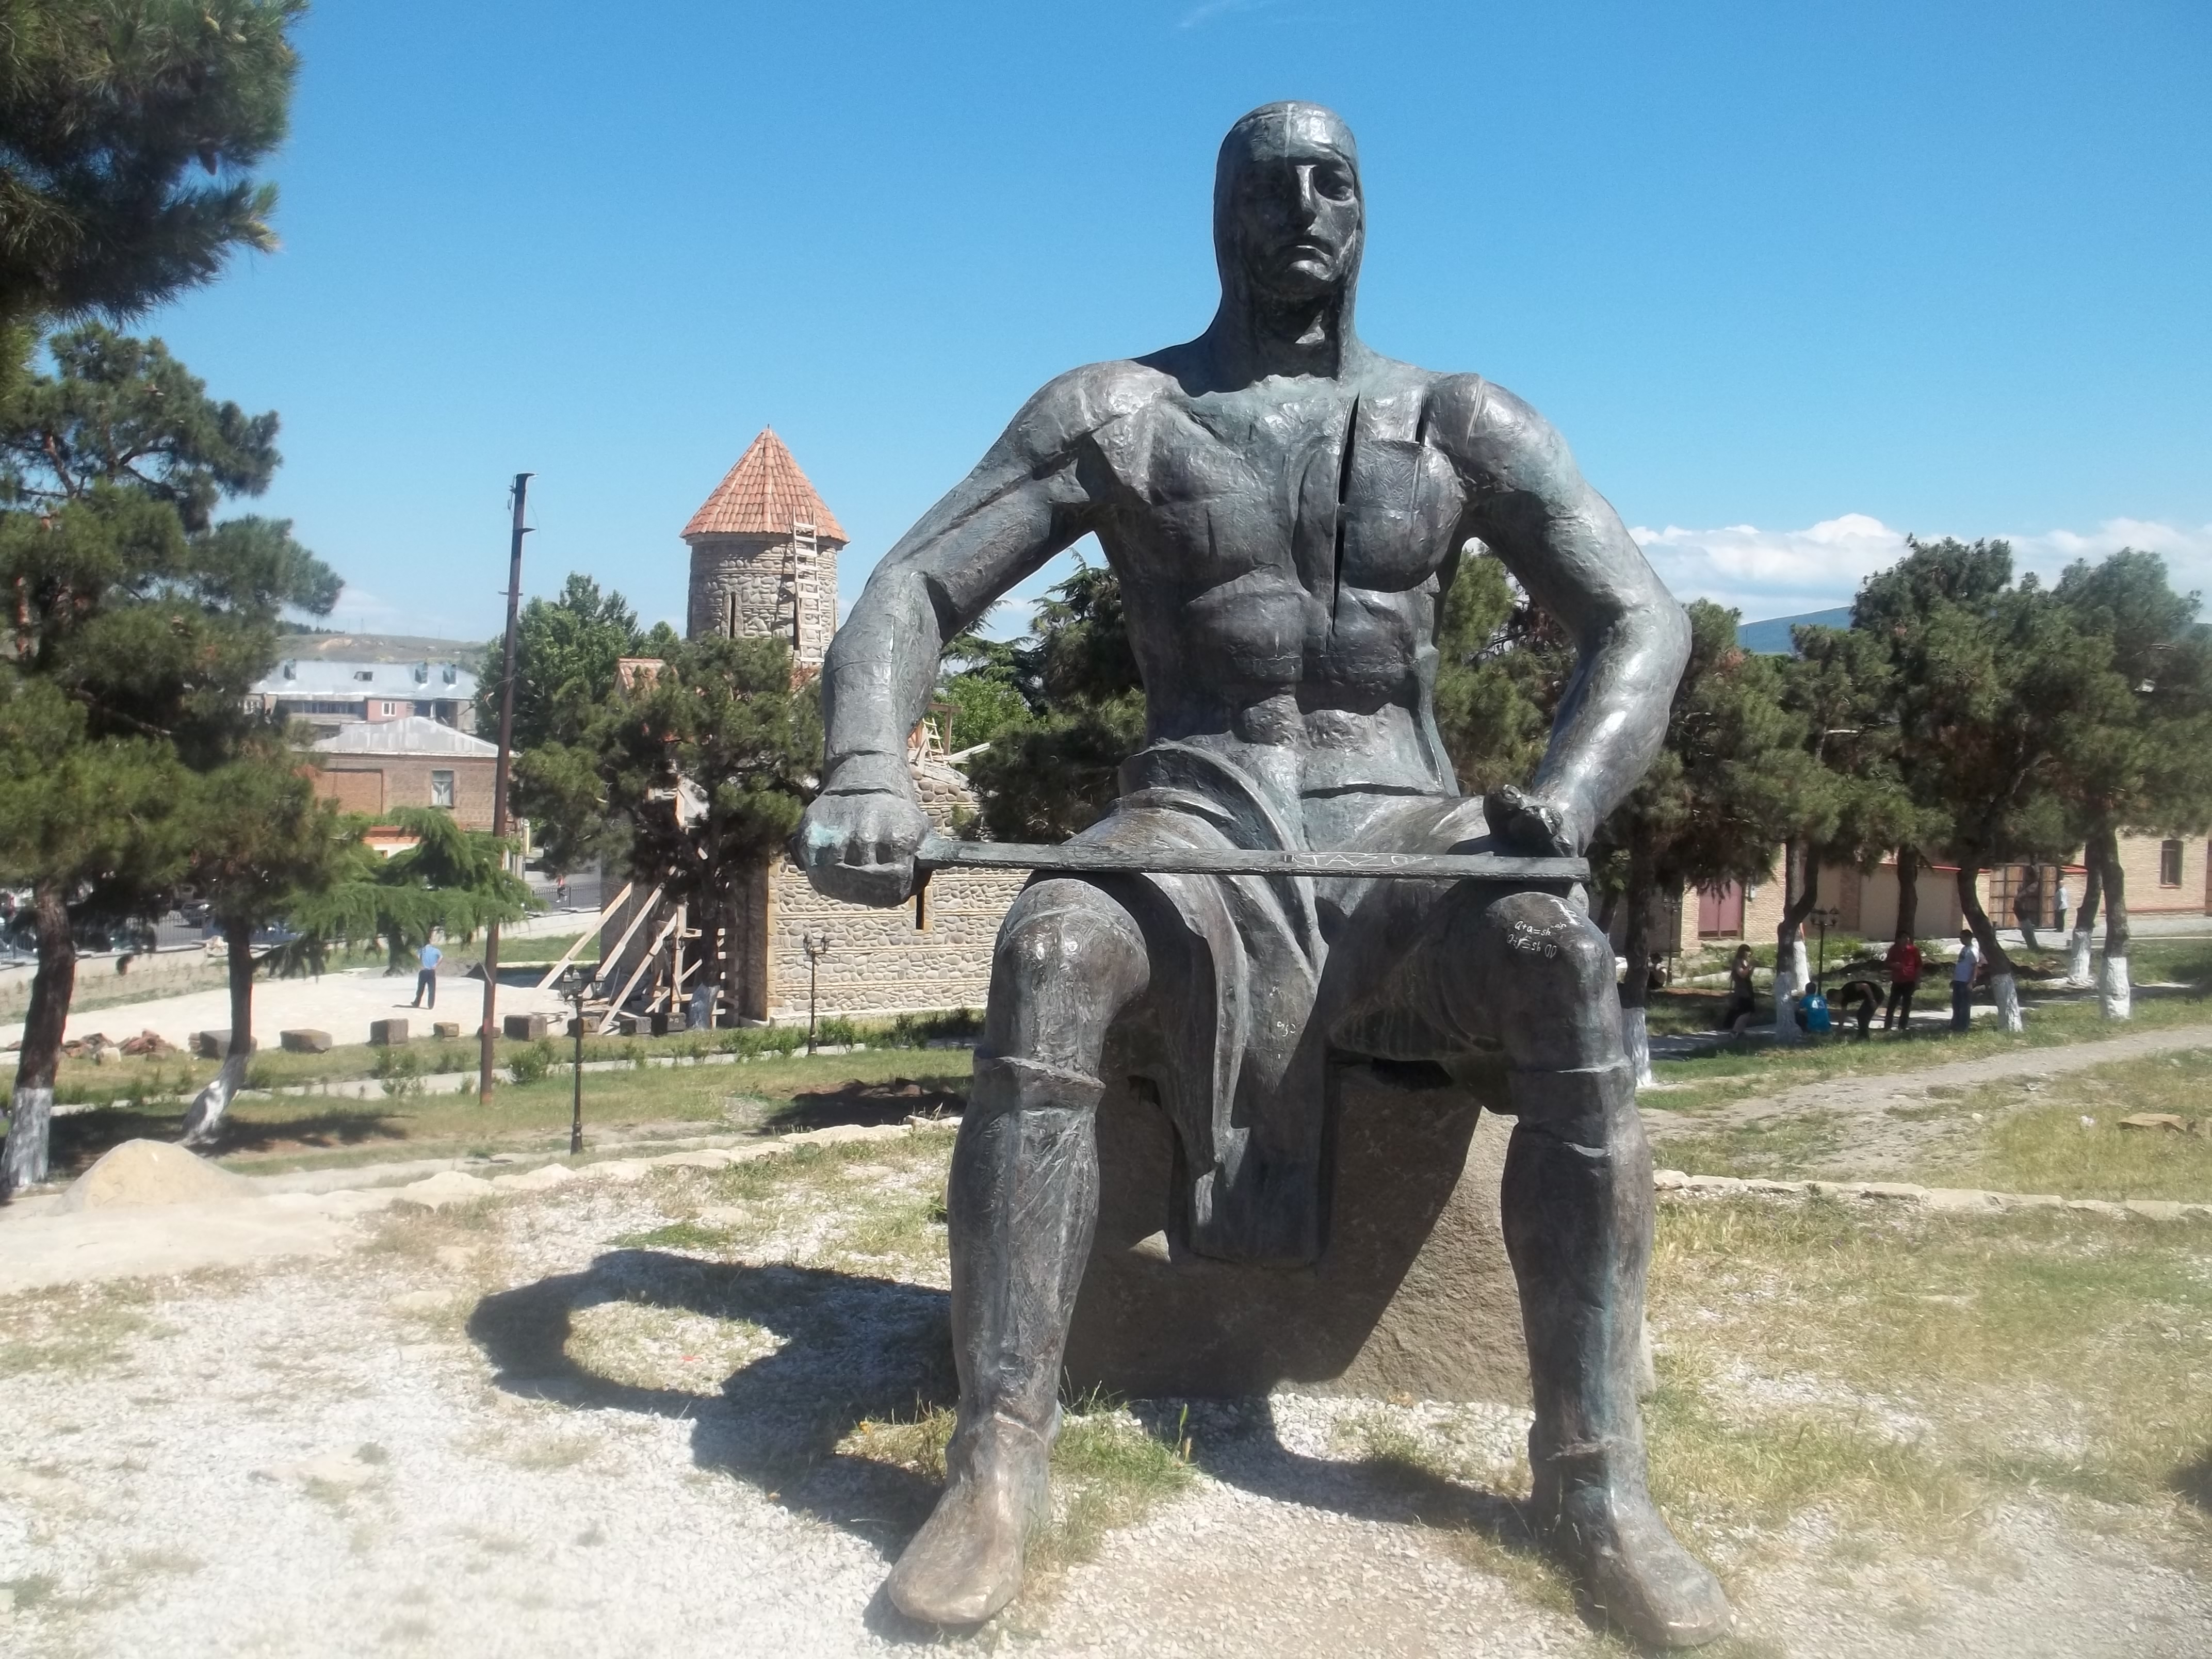 About Sights – The Memorial of Georgian Warrior Heroes in Gori ...